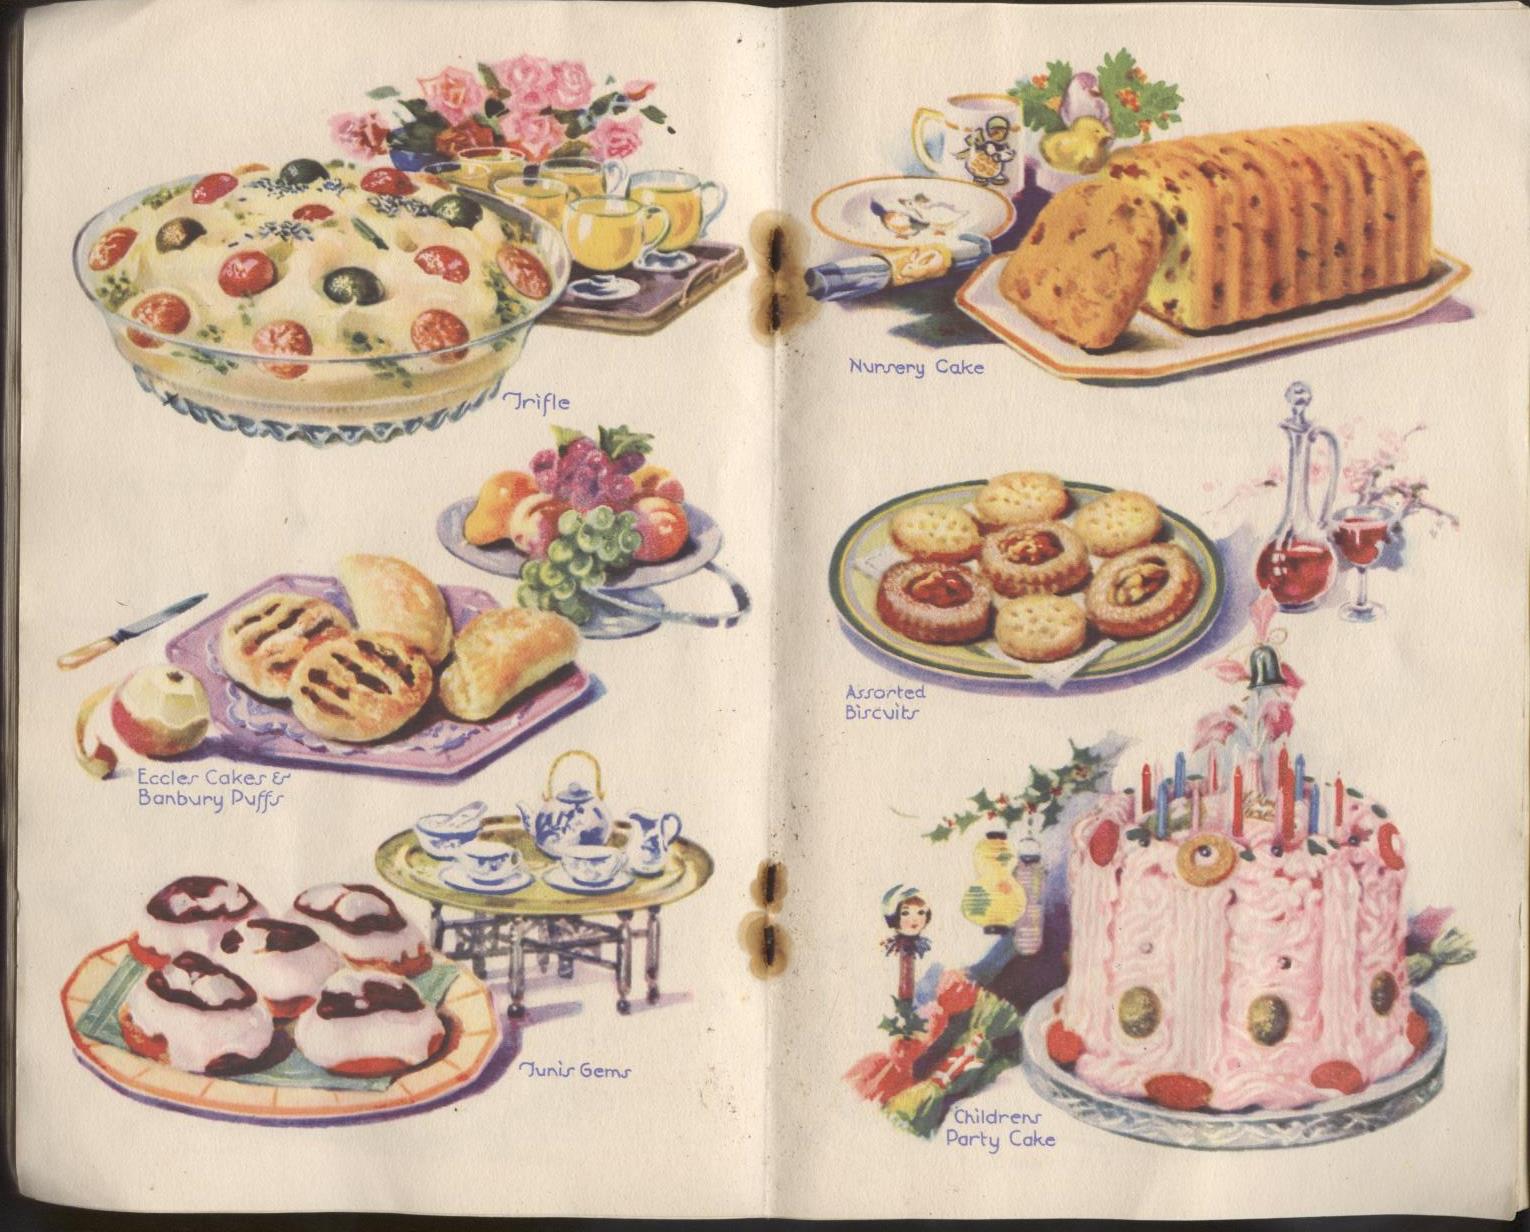 a collection of classic desserts from a vintage recipe book. 